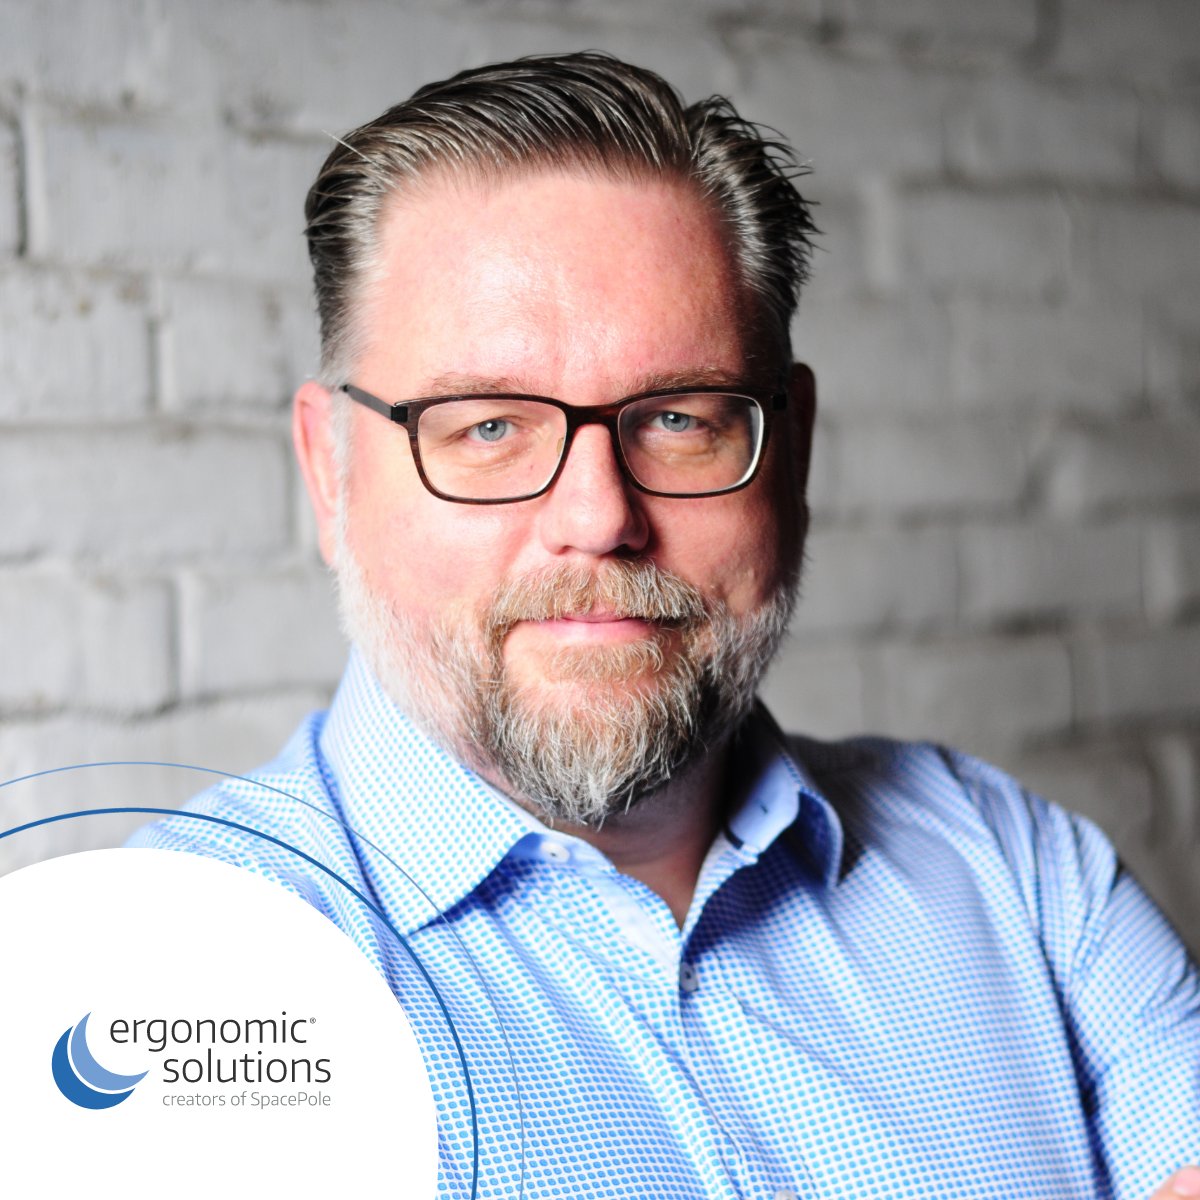 As we continue to grow, our team grows with it to provide exceptional service.

We welcome our new Channel Account Manager, Dirk Buße, to the Ergonomic Solutions team!

Welcome aboard 😁

#newemployee #wecome #ergonomicsolutions